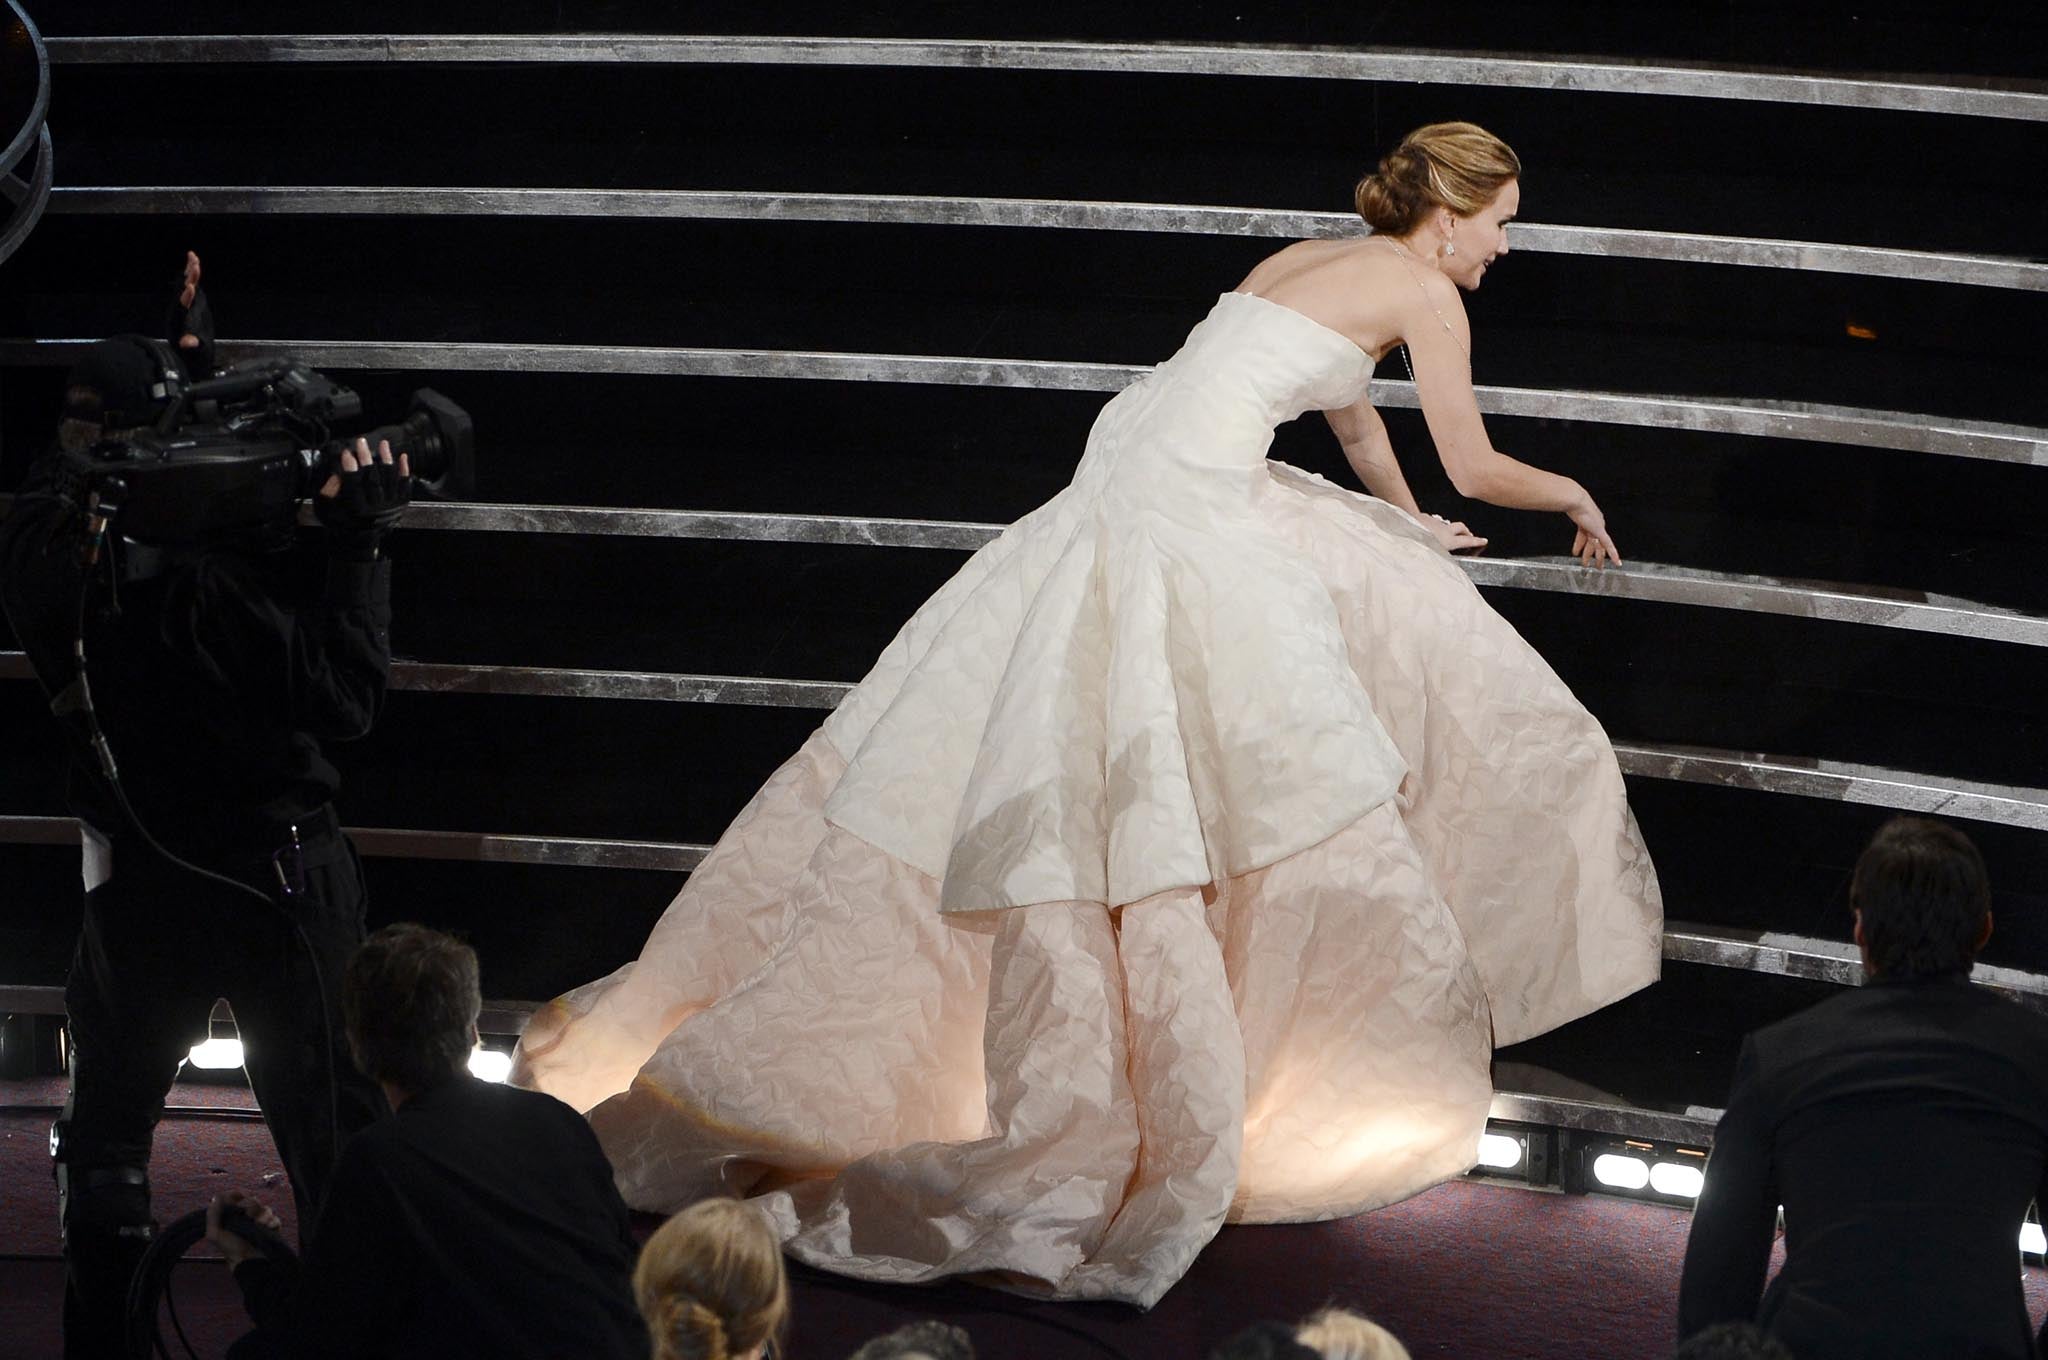 The bizarre reason Jennifer Lawrence fell at the Oscars: 'Cakewalk,  Cakewalk, Cakewalk' | The Independent | The Independent